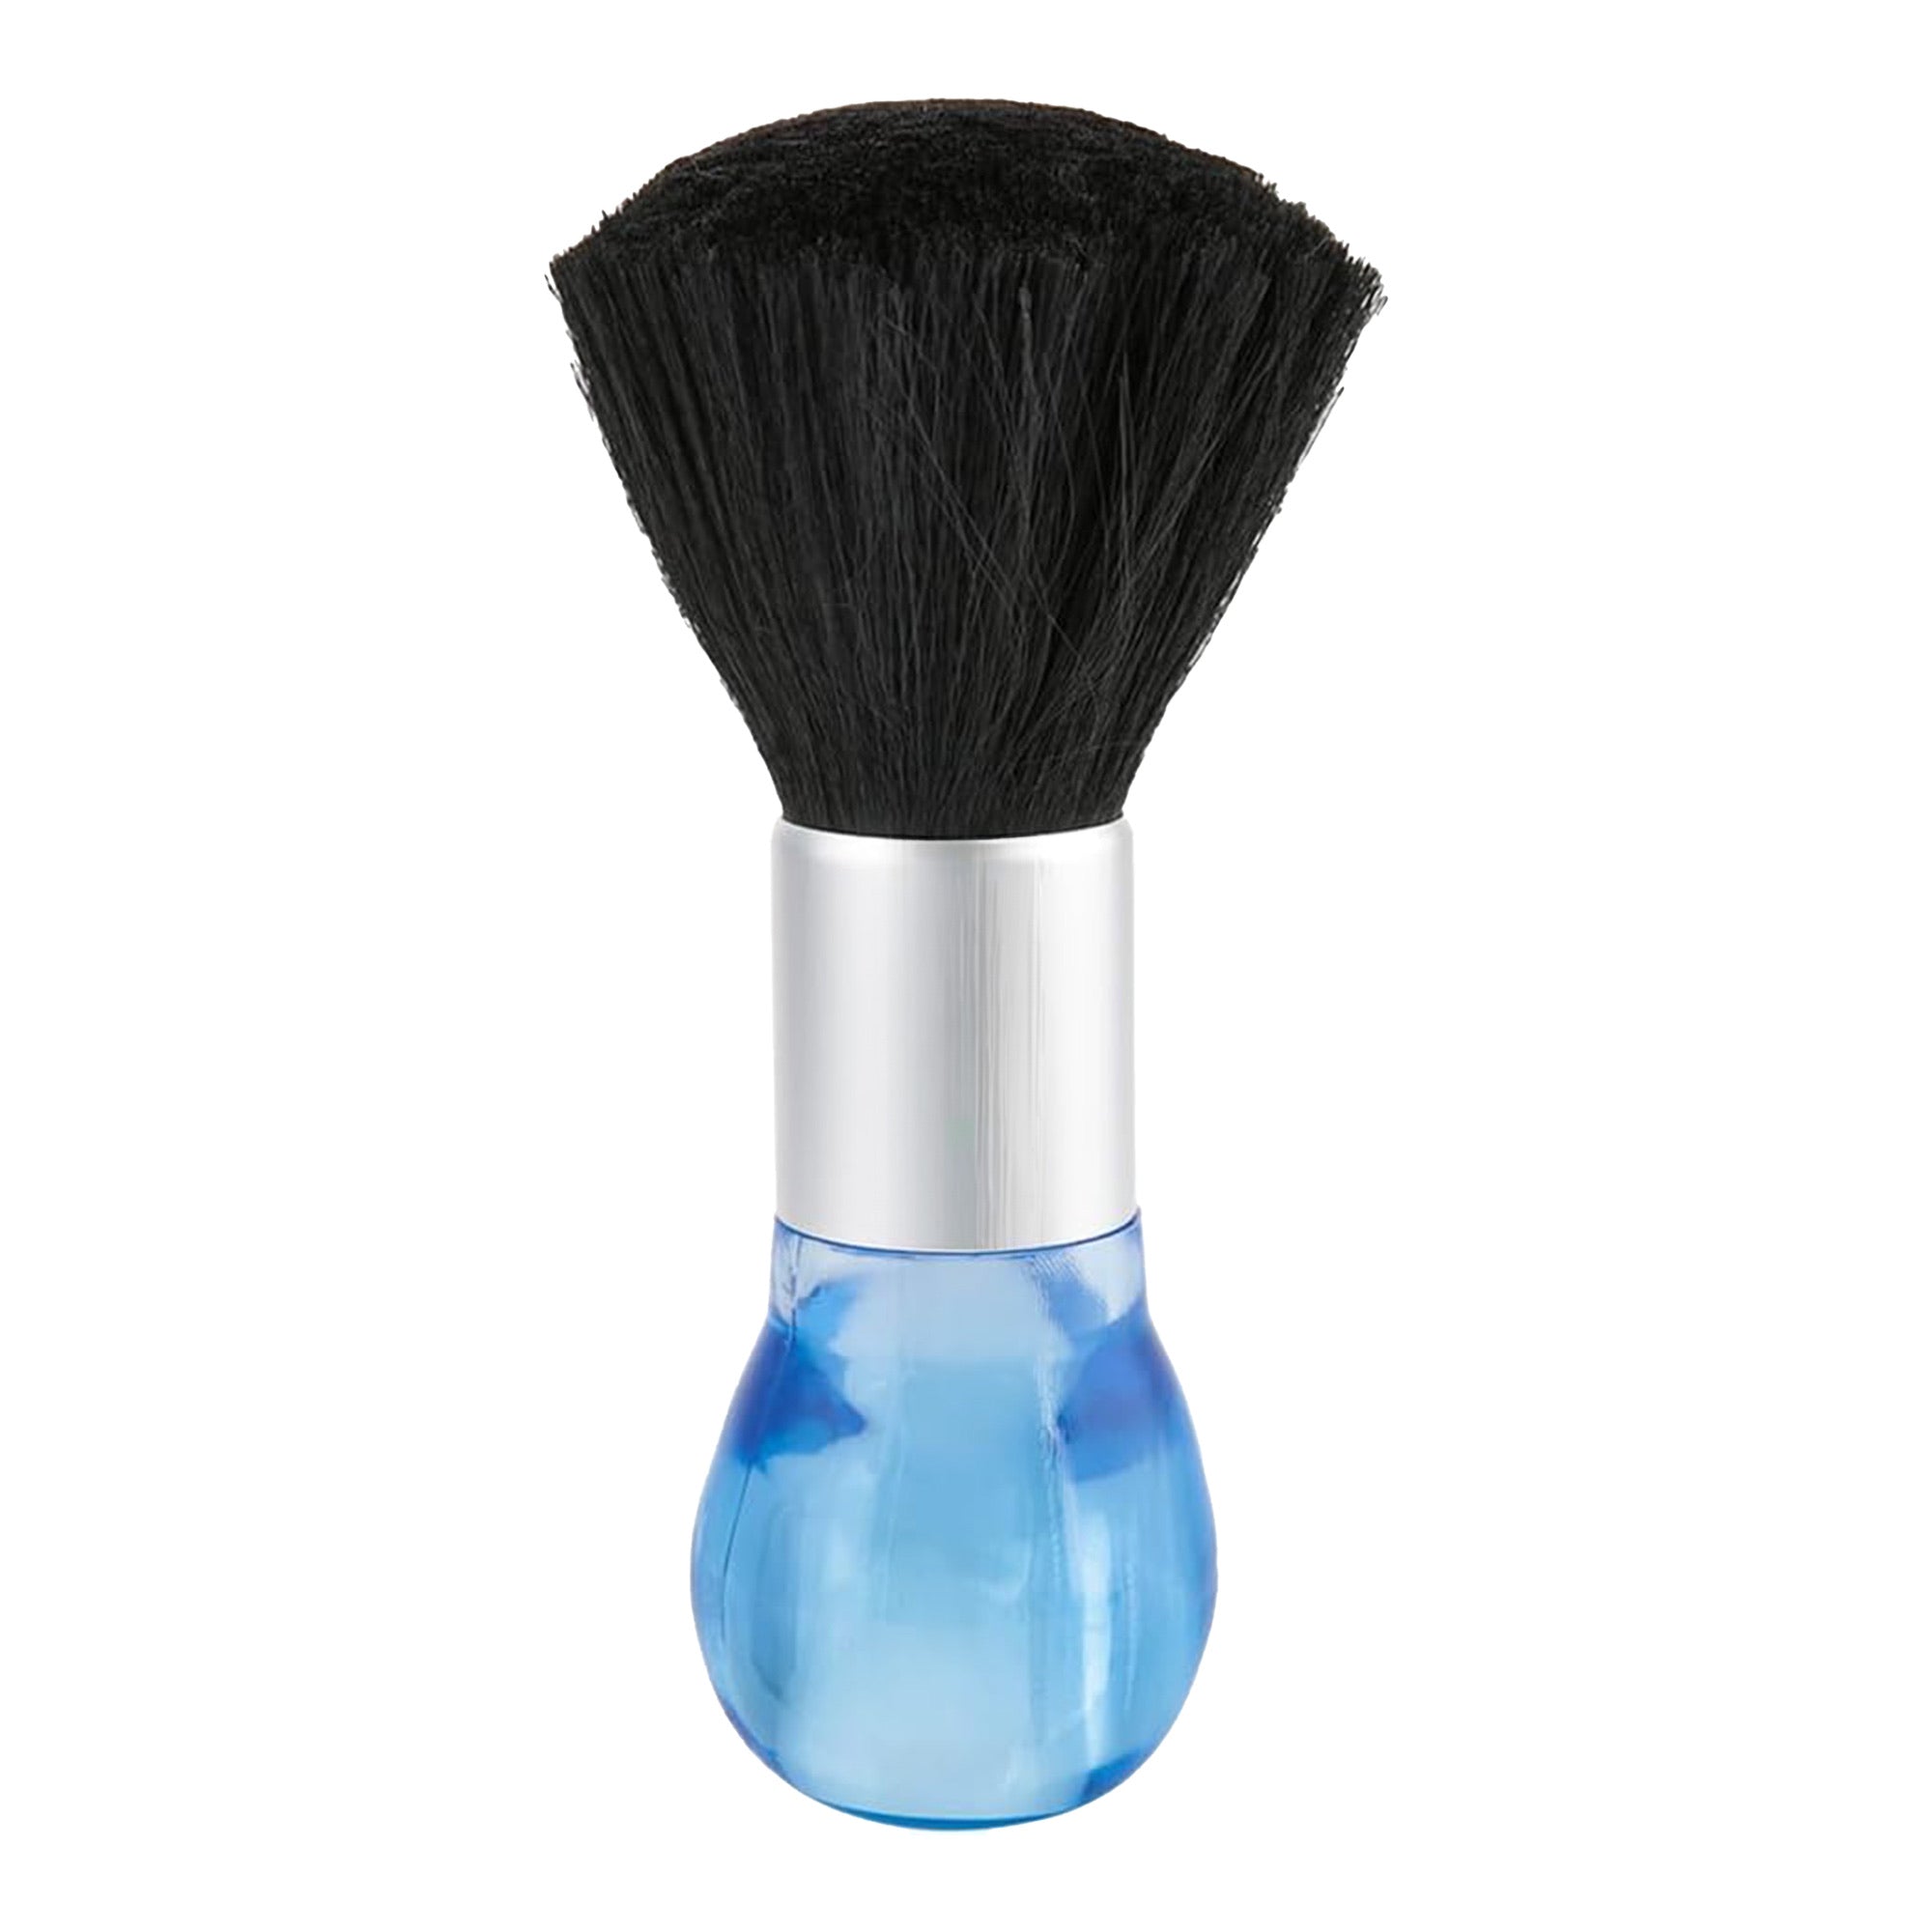 Eson - Neck Duster Brush Silver Metal Round Blue Handle 17x5cm